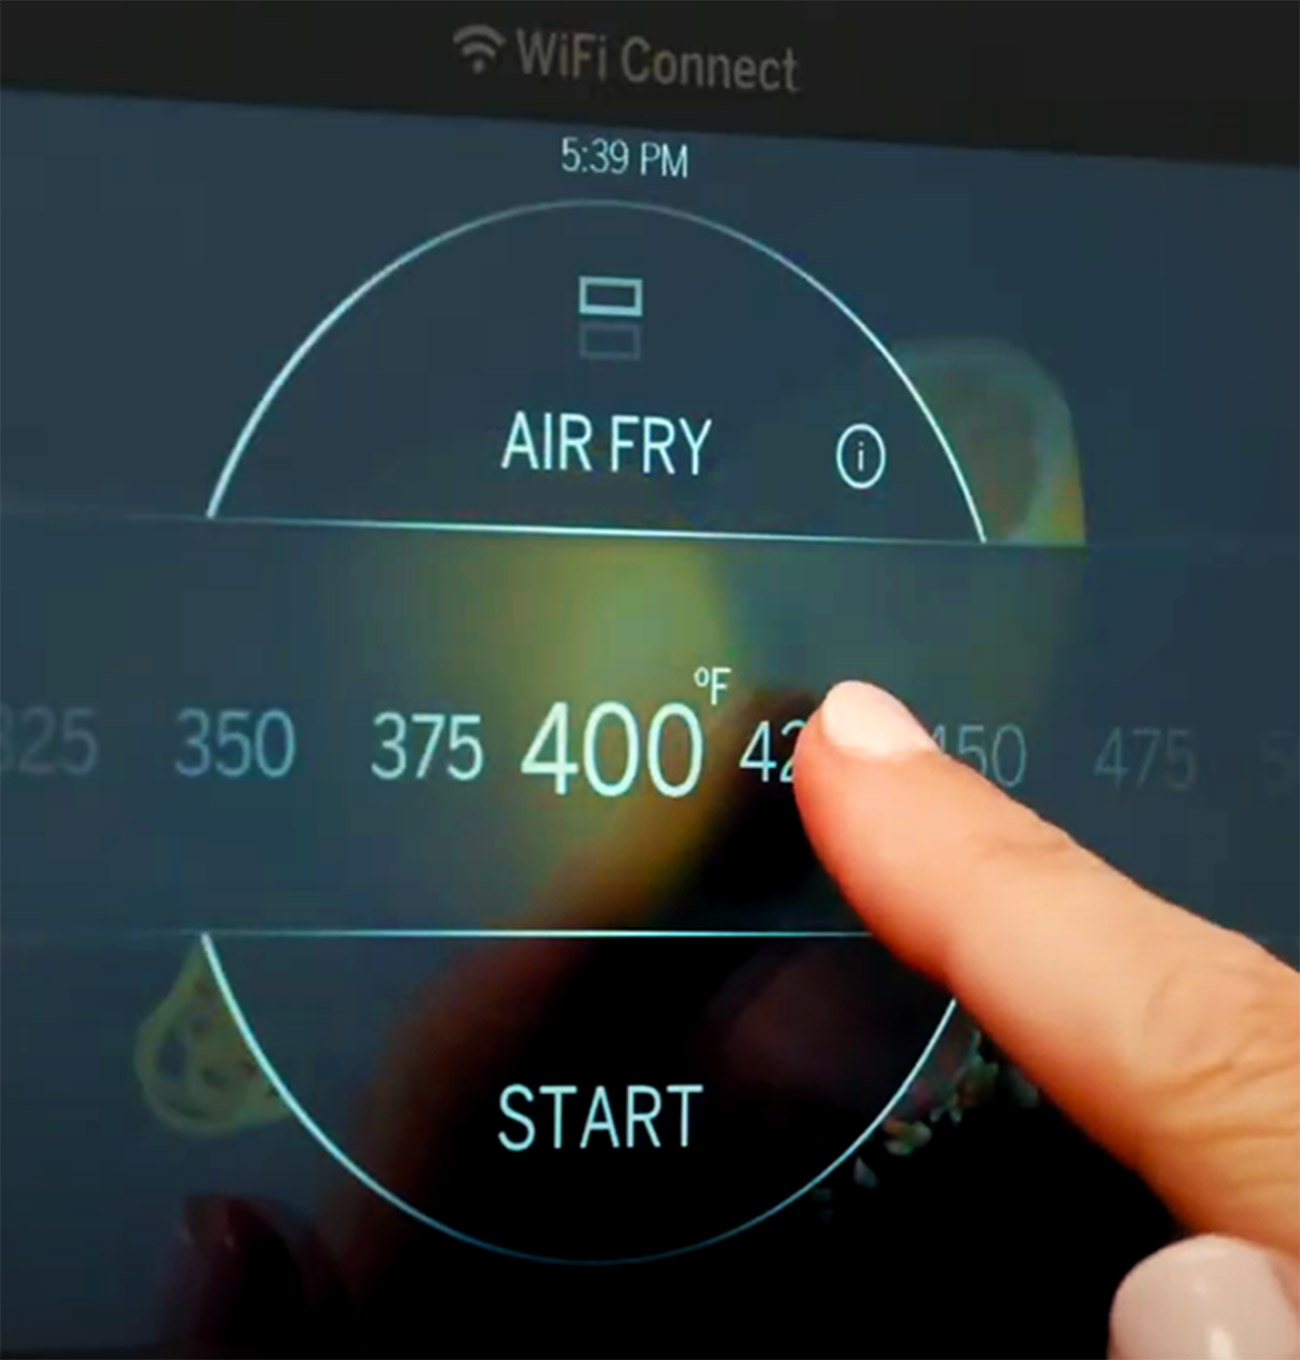 Air Fry Touch Control Panel